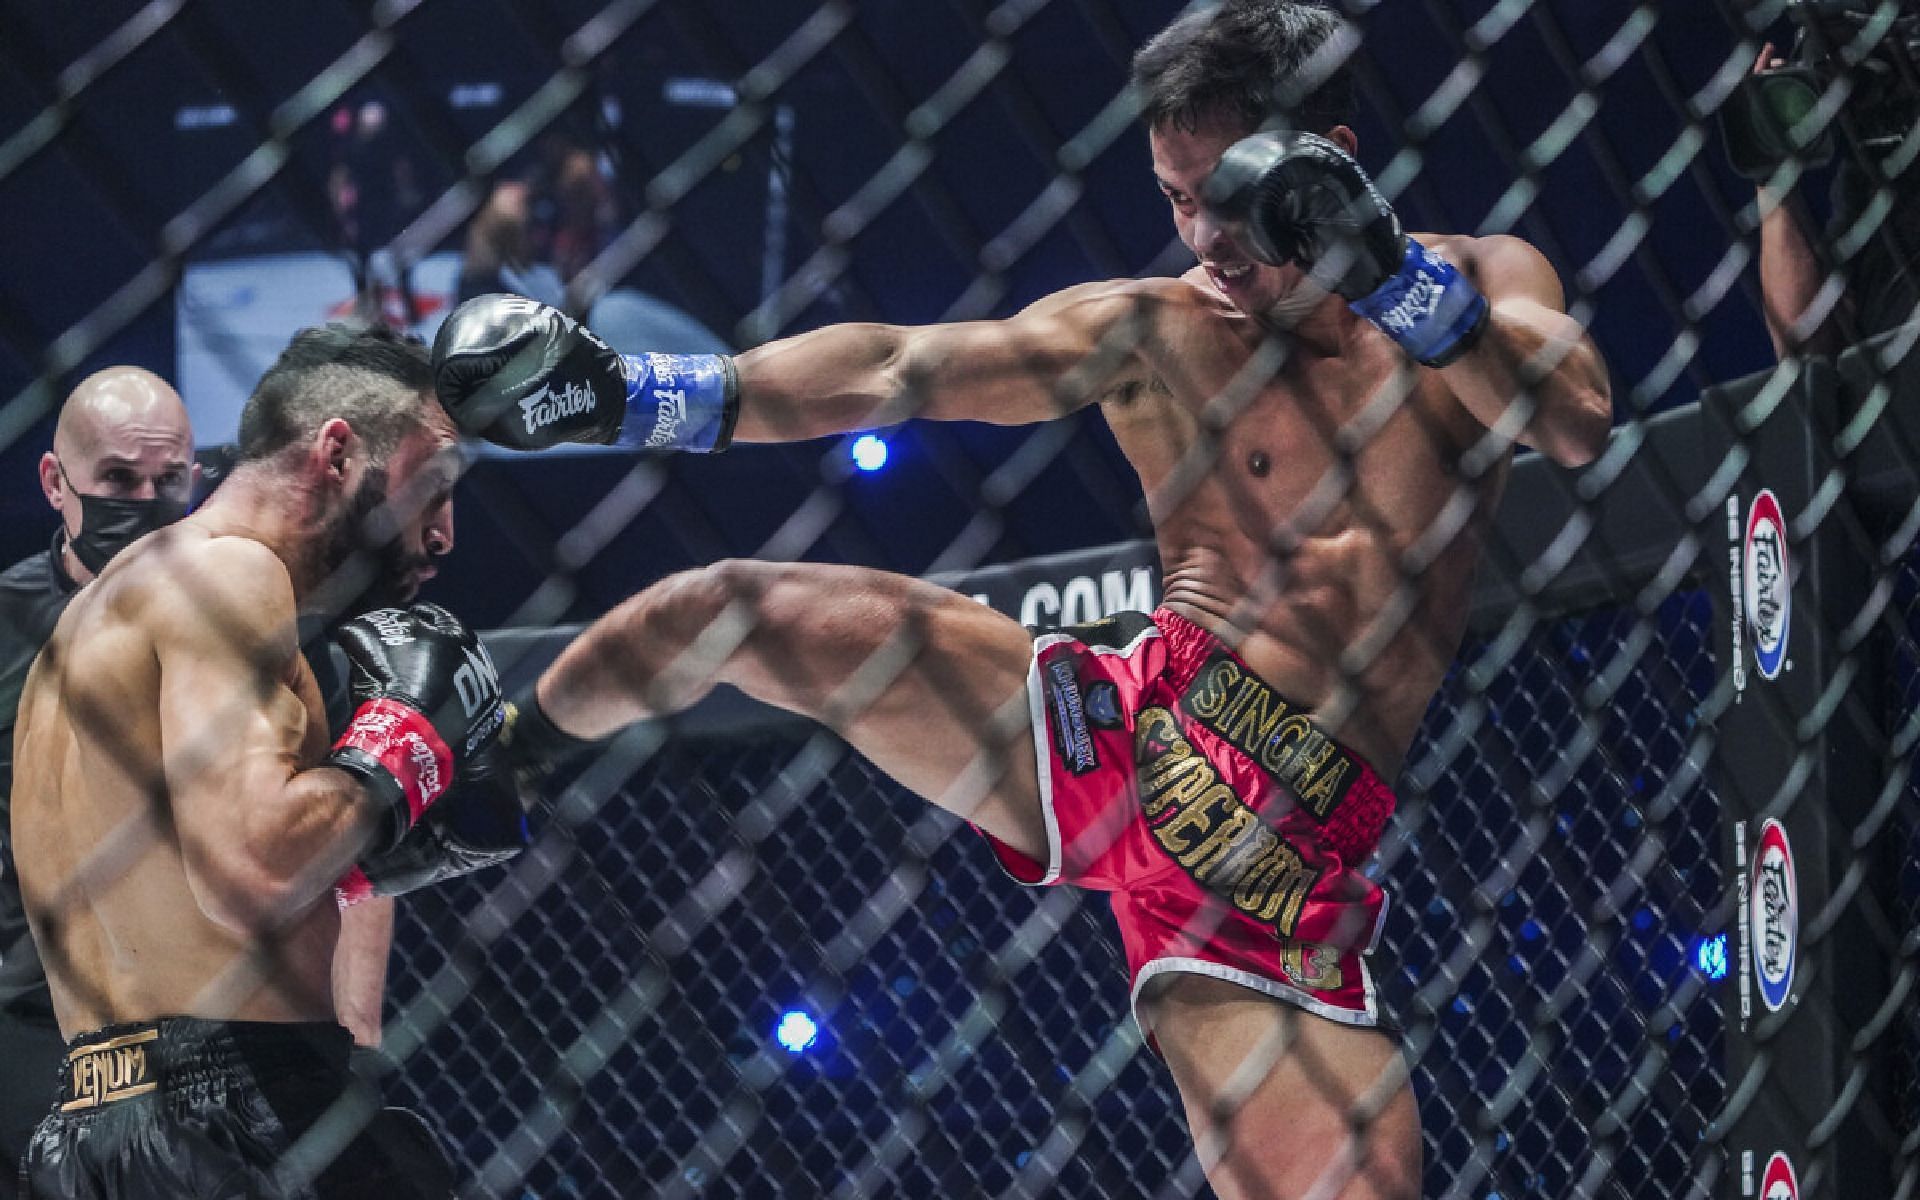 Superbon Singha Mawynn (right) launches a right head kick against Giorgio Petrosyan (left) in their October 2021 fight. [Photo ONE Championship]